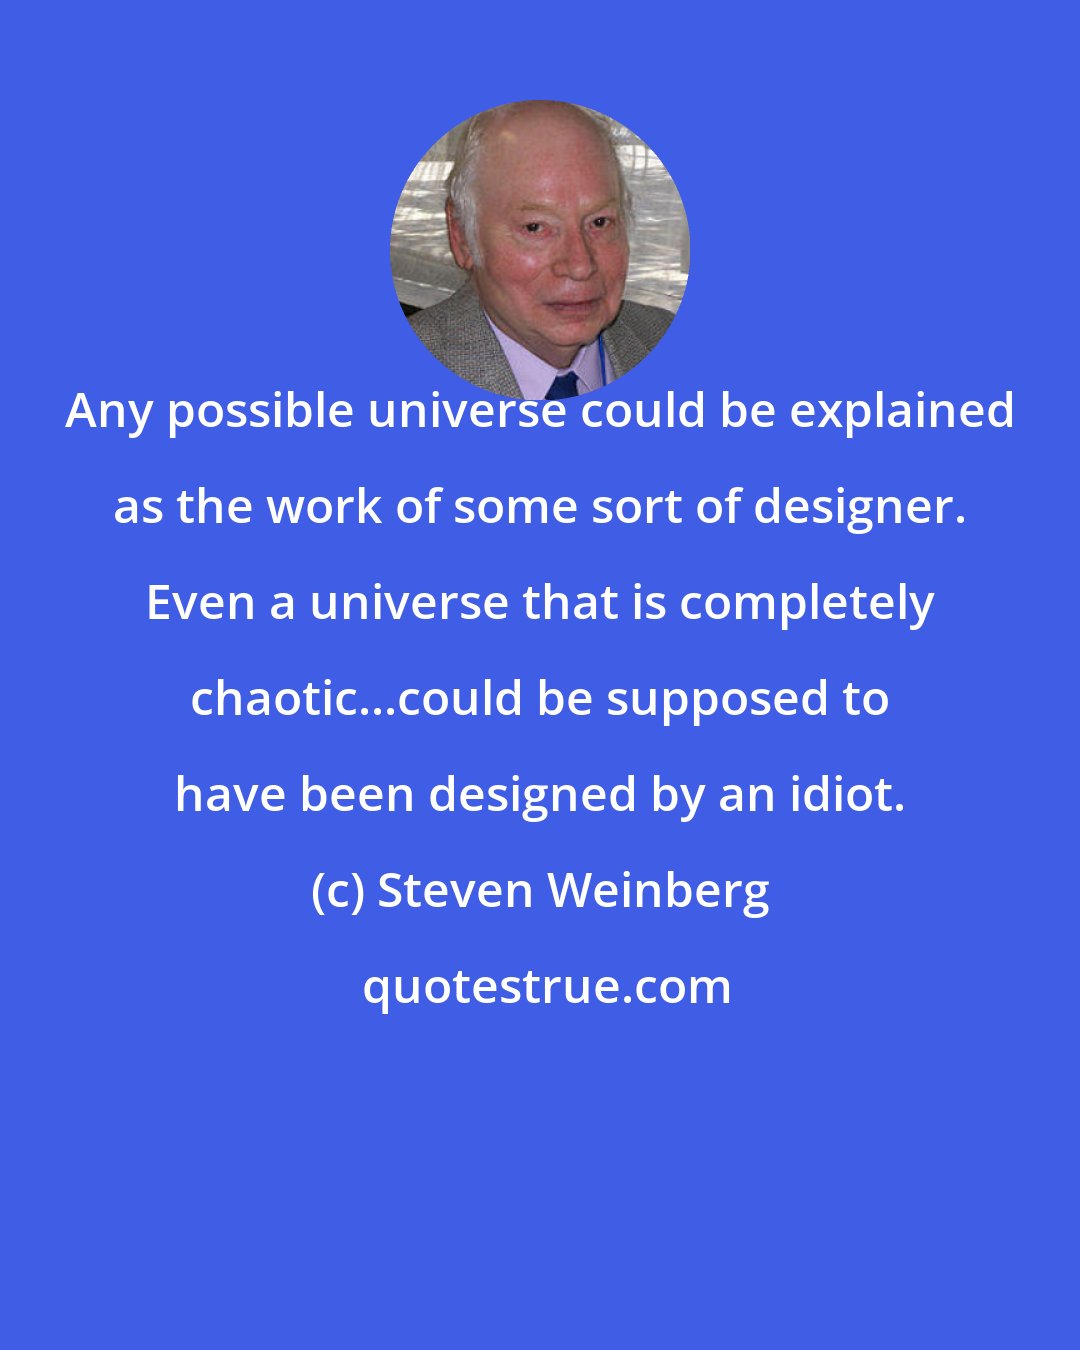 Steven Weinberg: Any possible universe could be explained as the work of some sort of designer. Even a universe that is completely chaotic...could be supposed to have been designed by an idiot.